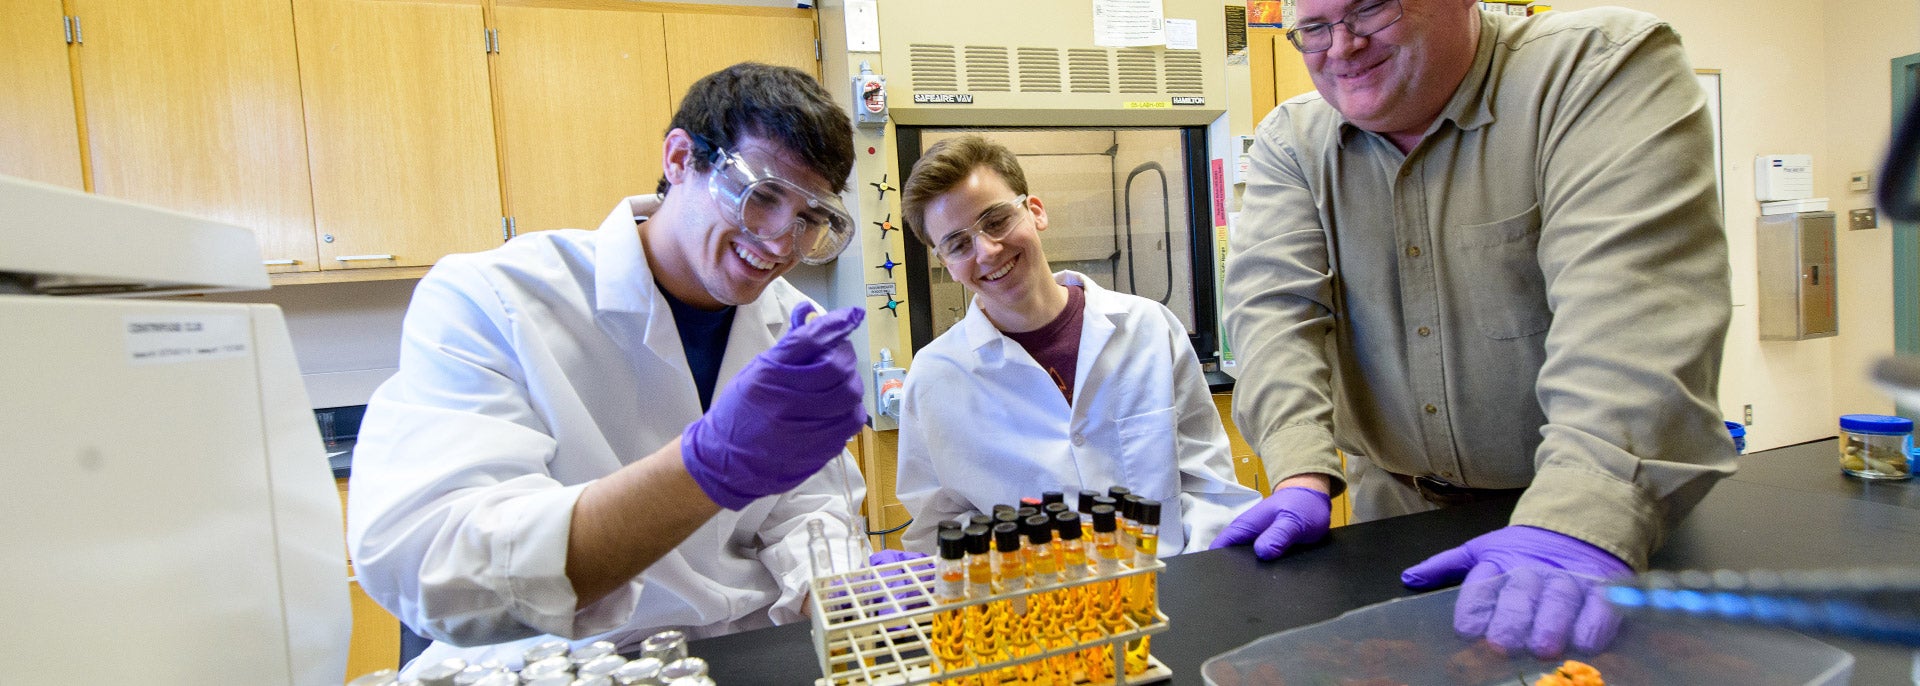 photo of professor working with 2 students in lab